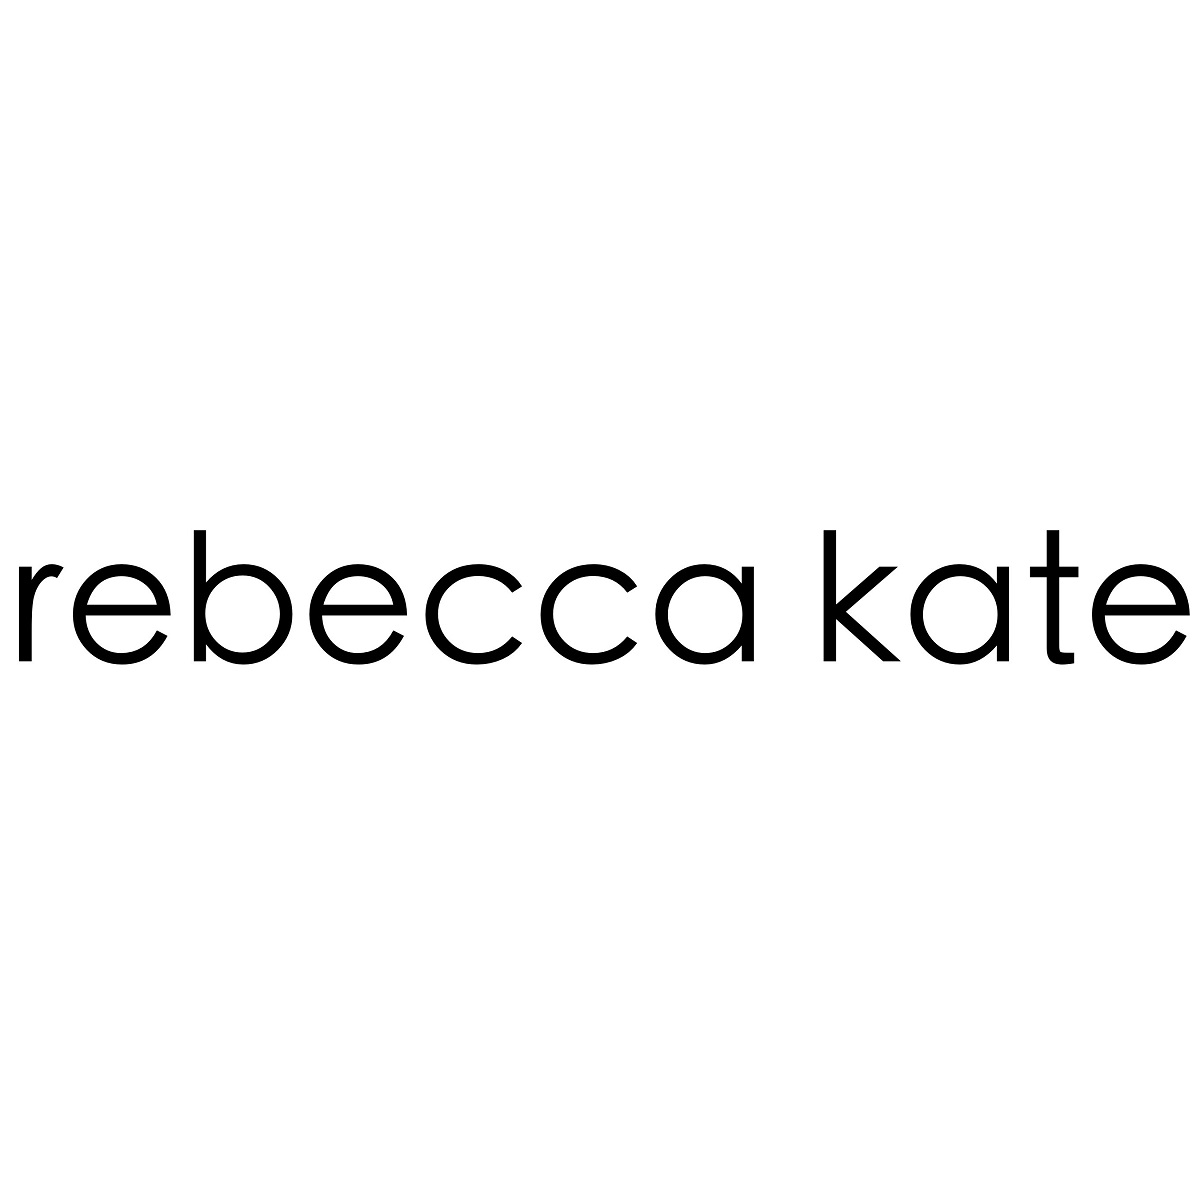 The Aesthete Collective, Rebecca Kate Artworks